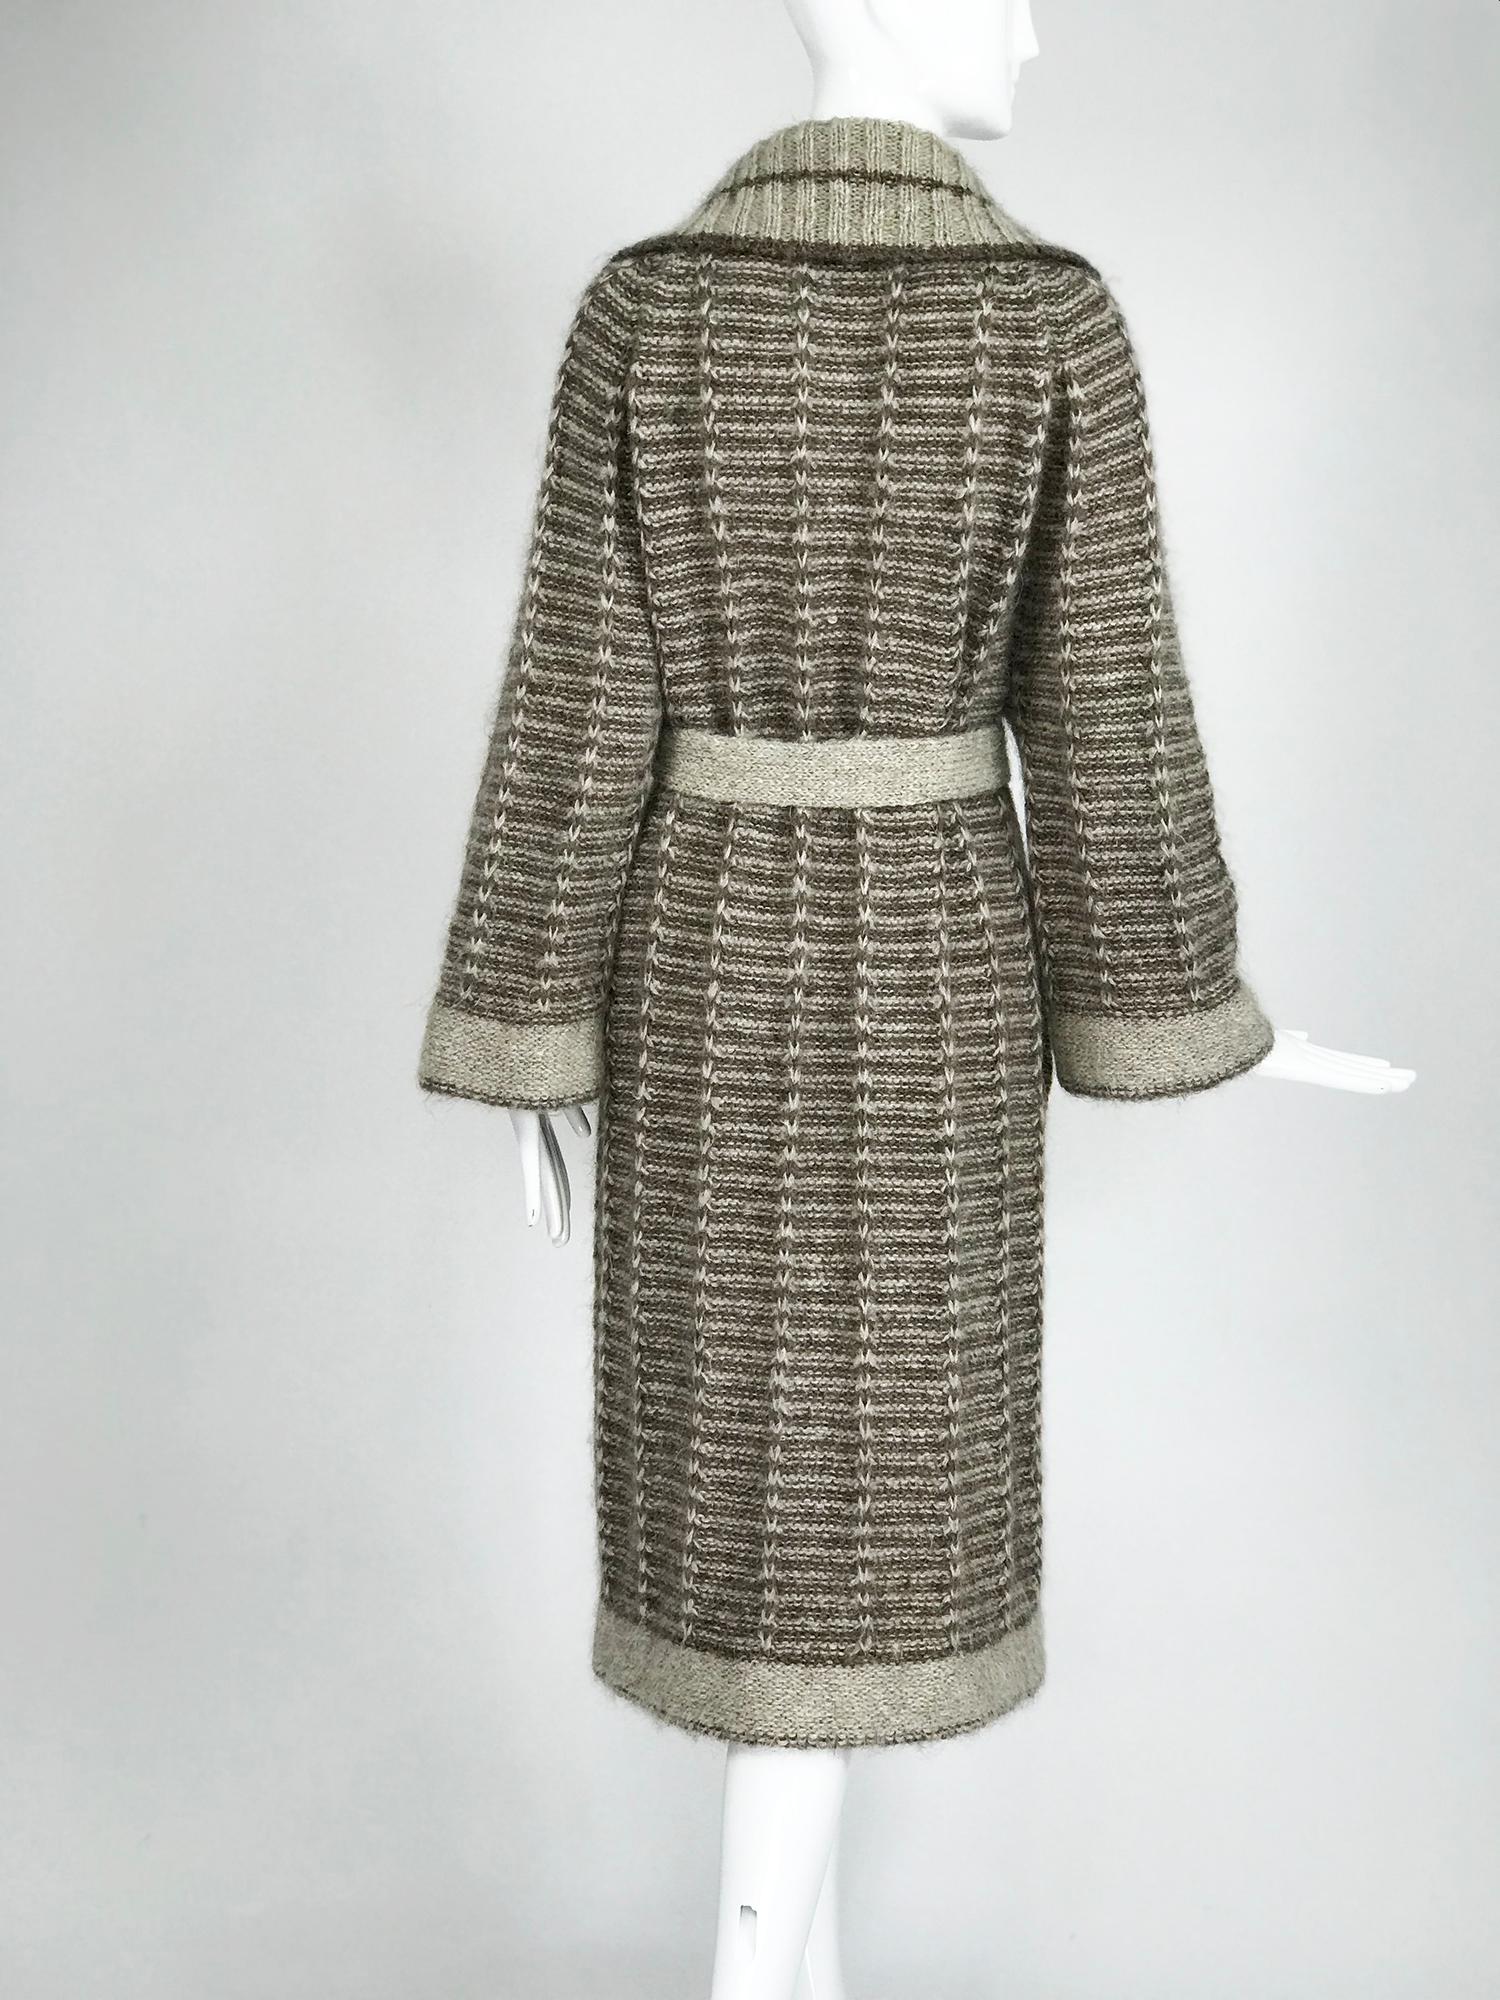 Women's Vintage Hand Knit Belted Sweater Coat 1990s